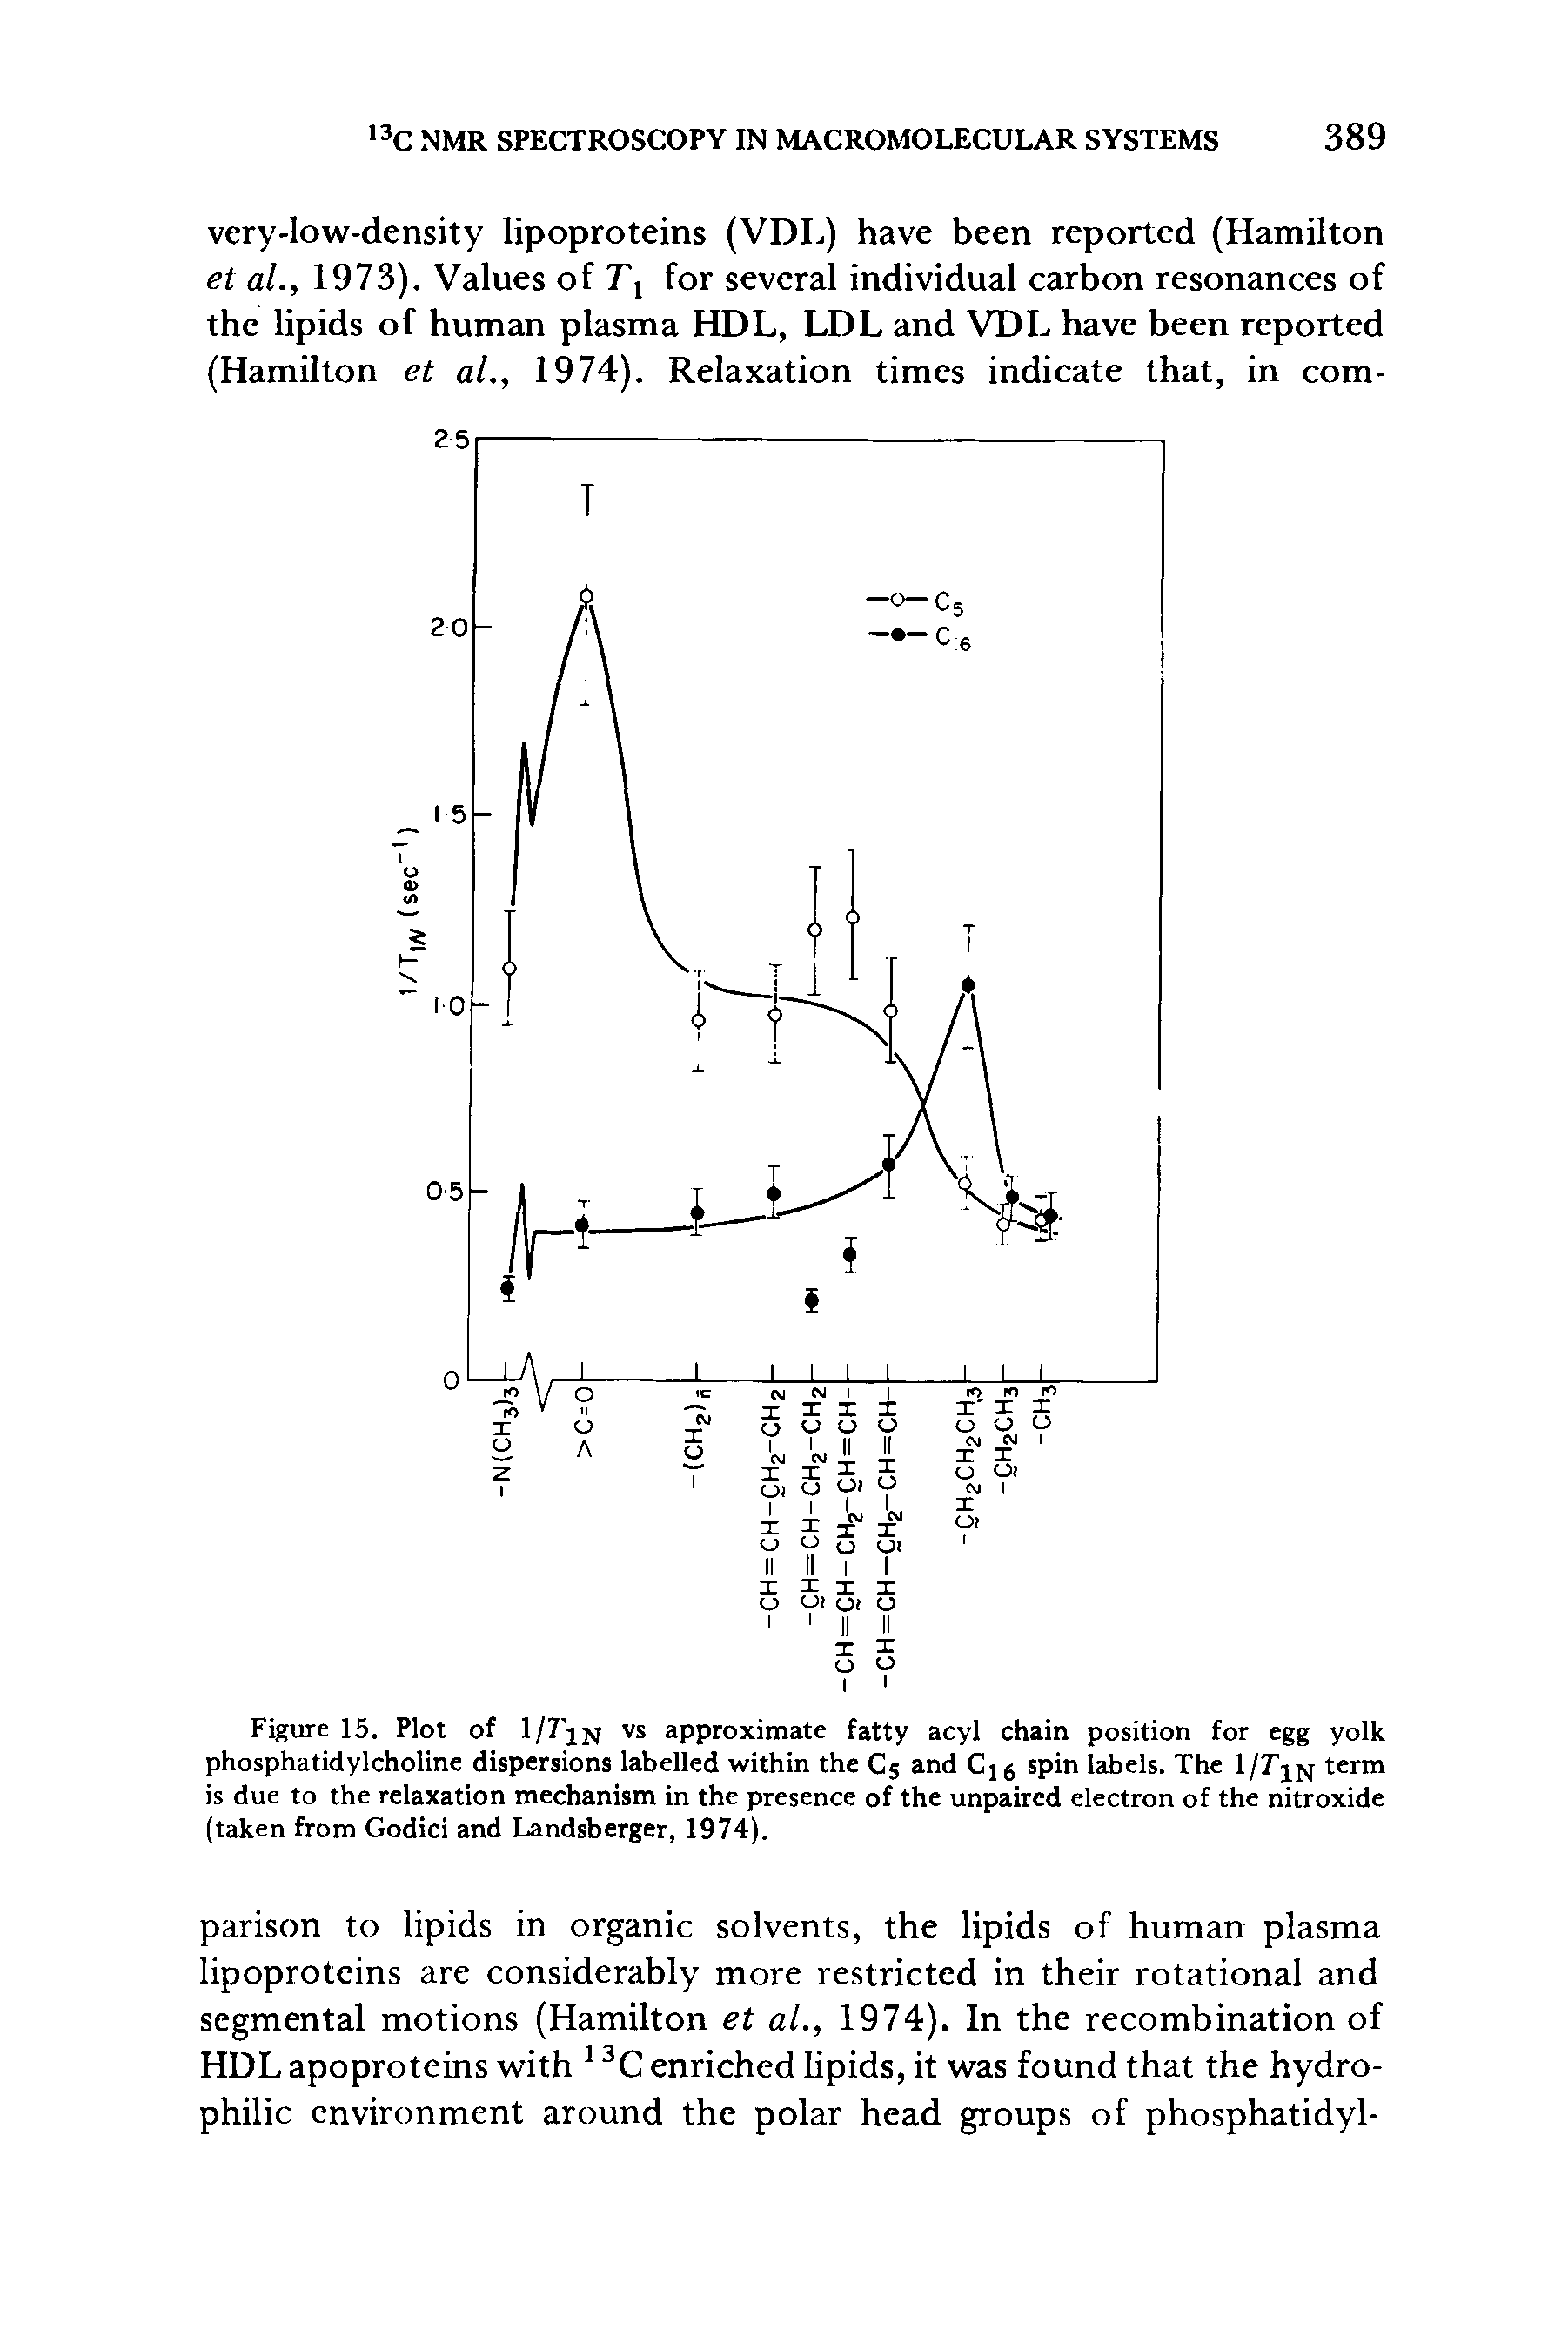 Figure 15. Plot of 1/7 jn vs approximate fatty acyl chain position for egg yolk phosphatidylcholine dispersions labelled within the C5 and spin labels. The l/ term is due to the relaxation mechanism in the presence of the unpaired electron of the nitroxide (taken from Godici and Landsberger, 1974).